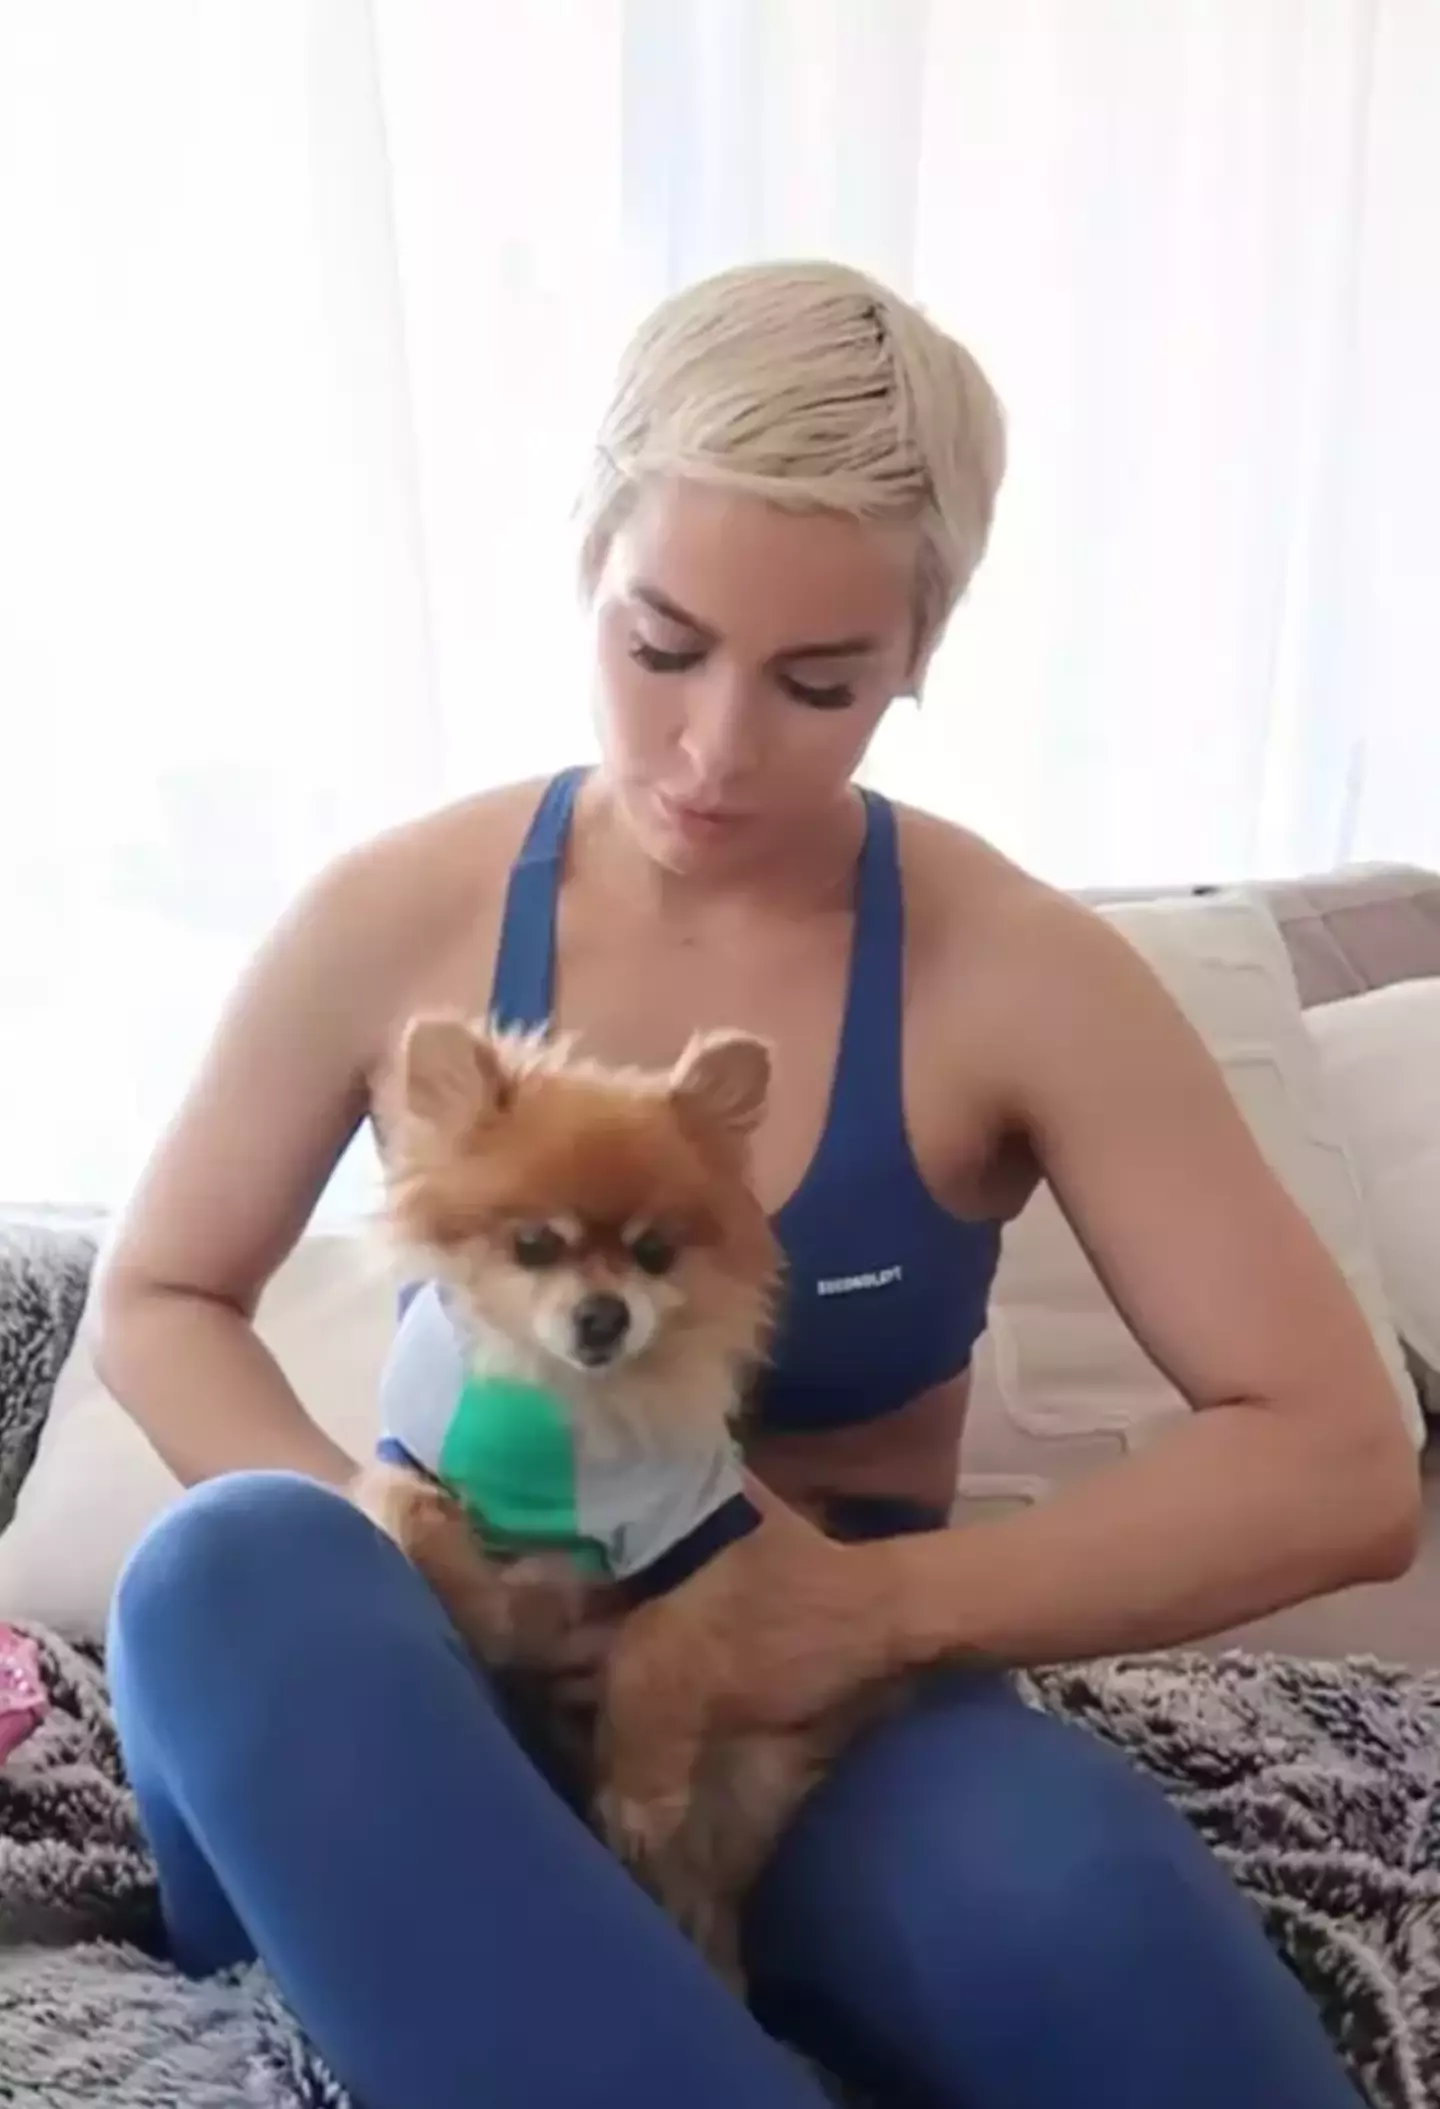 Ellie shared a video of her dressing her dog in comparison to a mum trying to calm down a restless toddler.